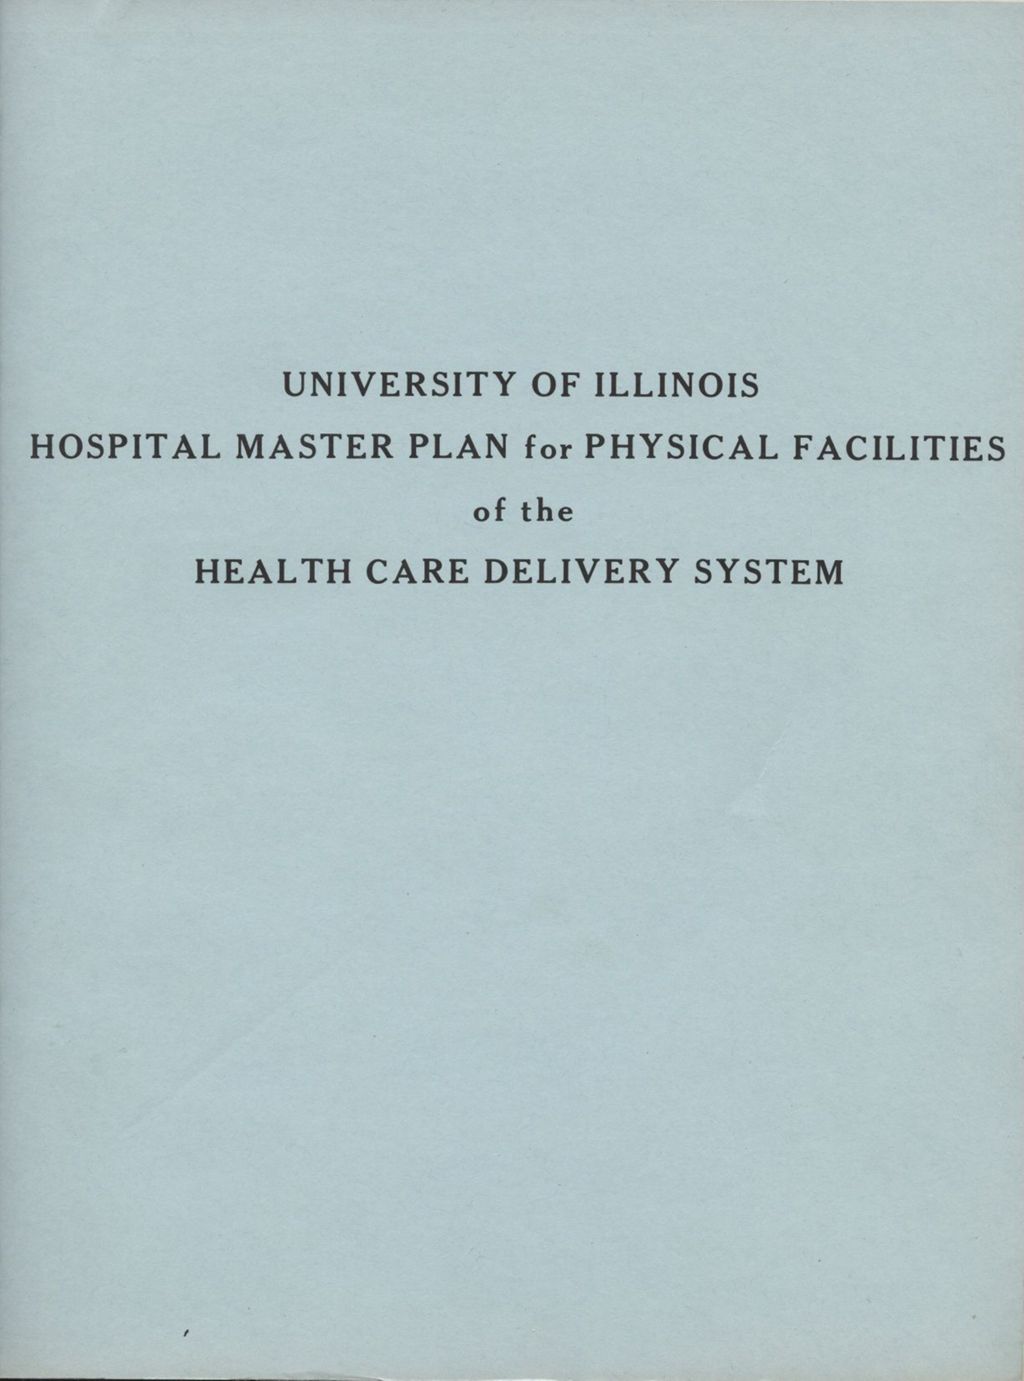 Miniature of University of Illinois Hospital Master Plan for Physical Facilities of the Health Care Delivery System